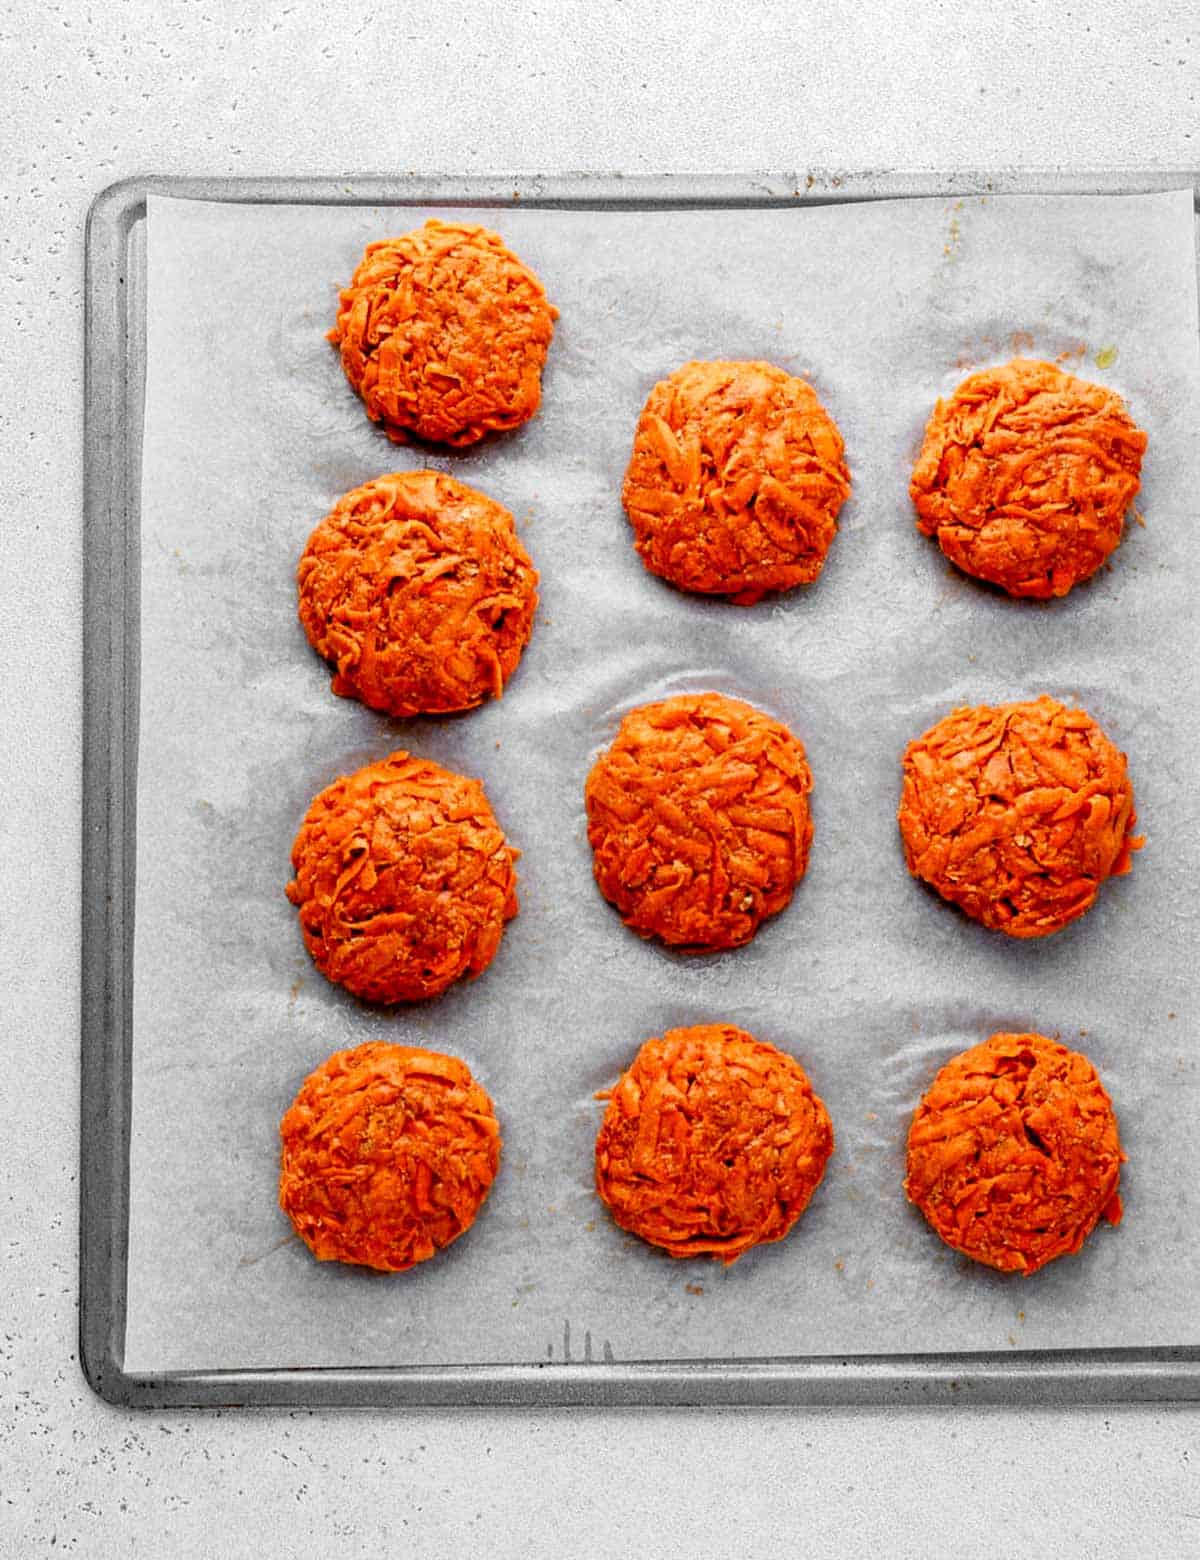 Sweet potato fritters on a baking sheet ready to be baked.